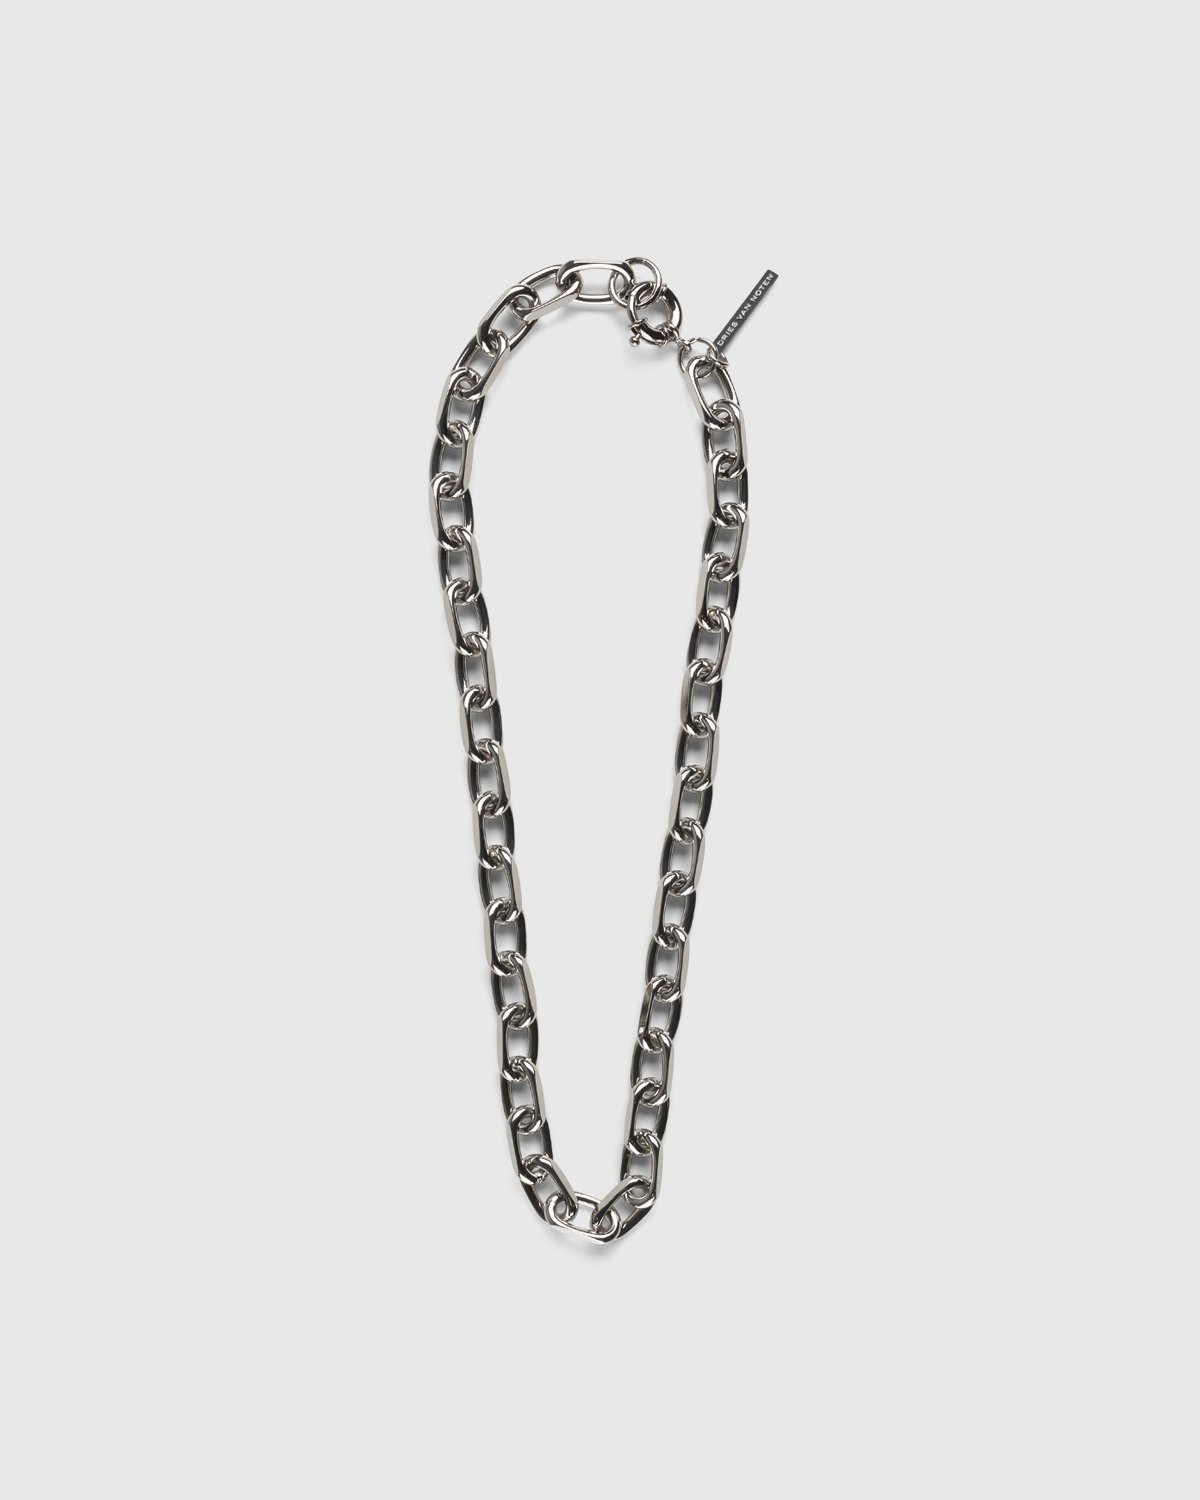 Dries van Noten - Chain Link Necklace Silver - Accessories - Silver - Image 1